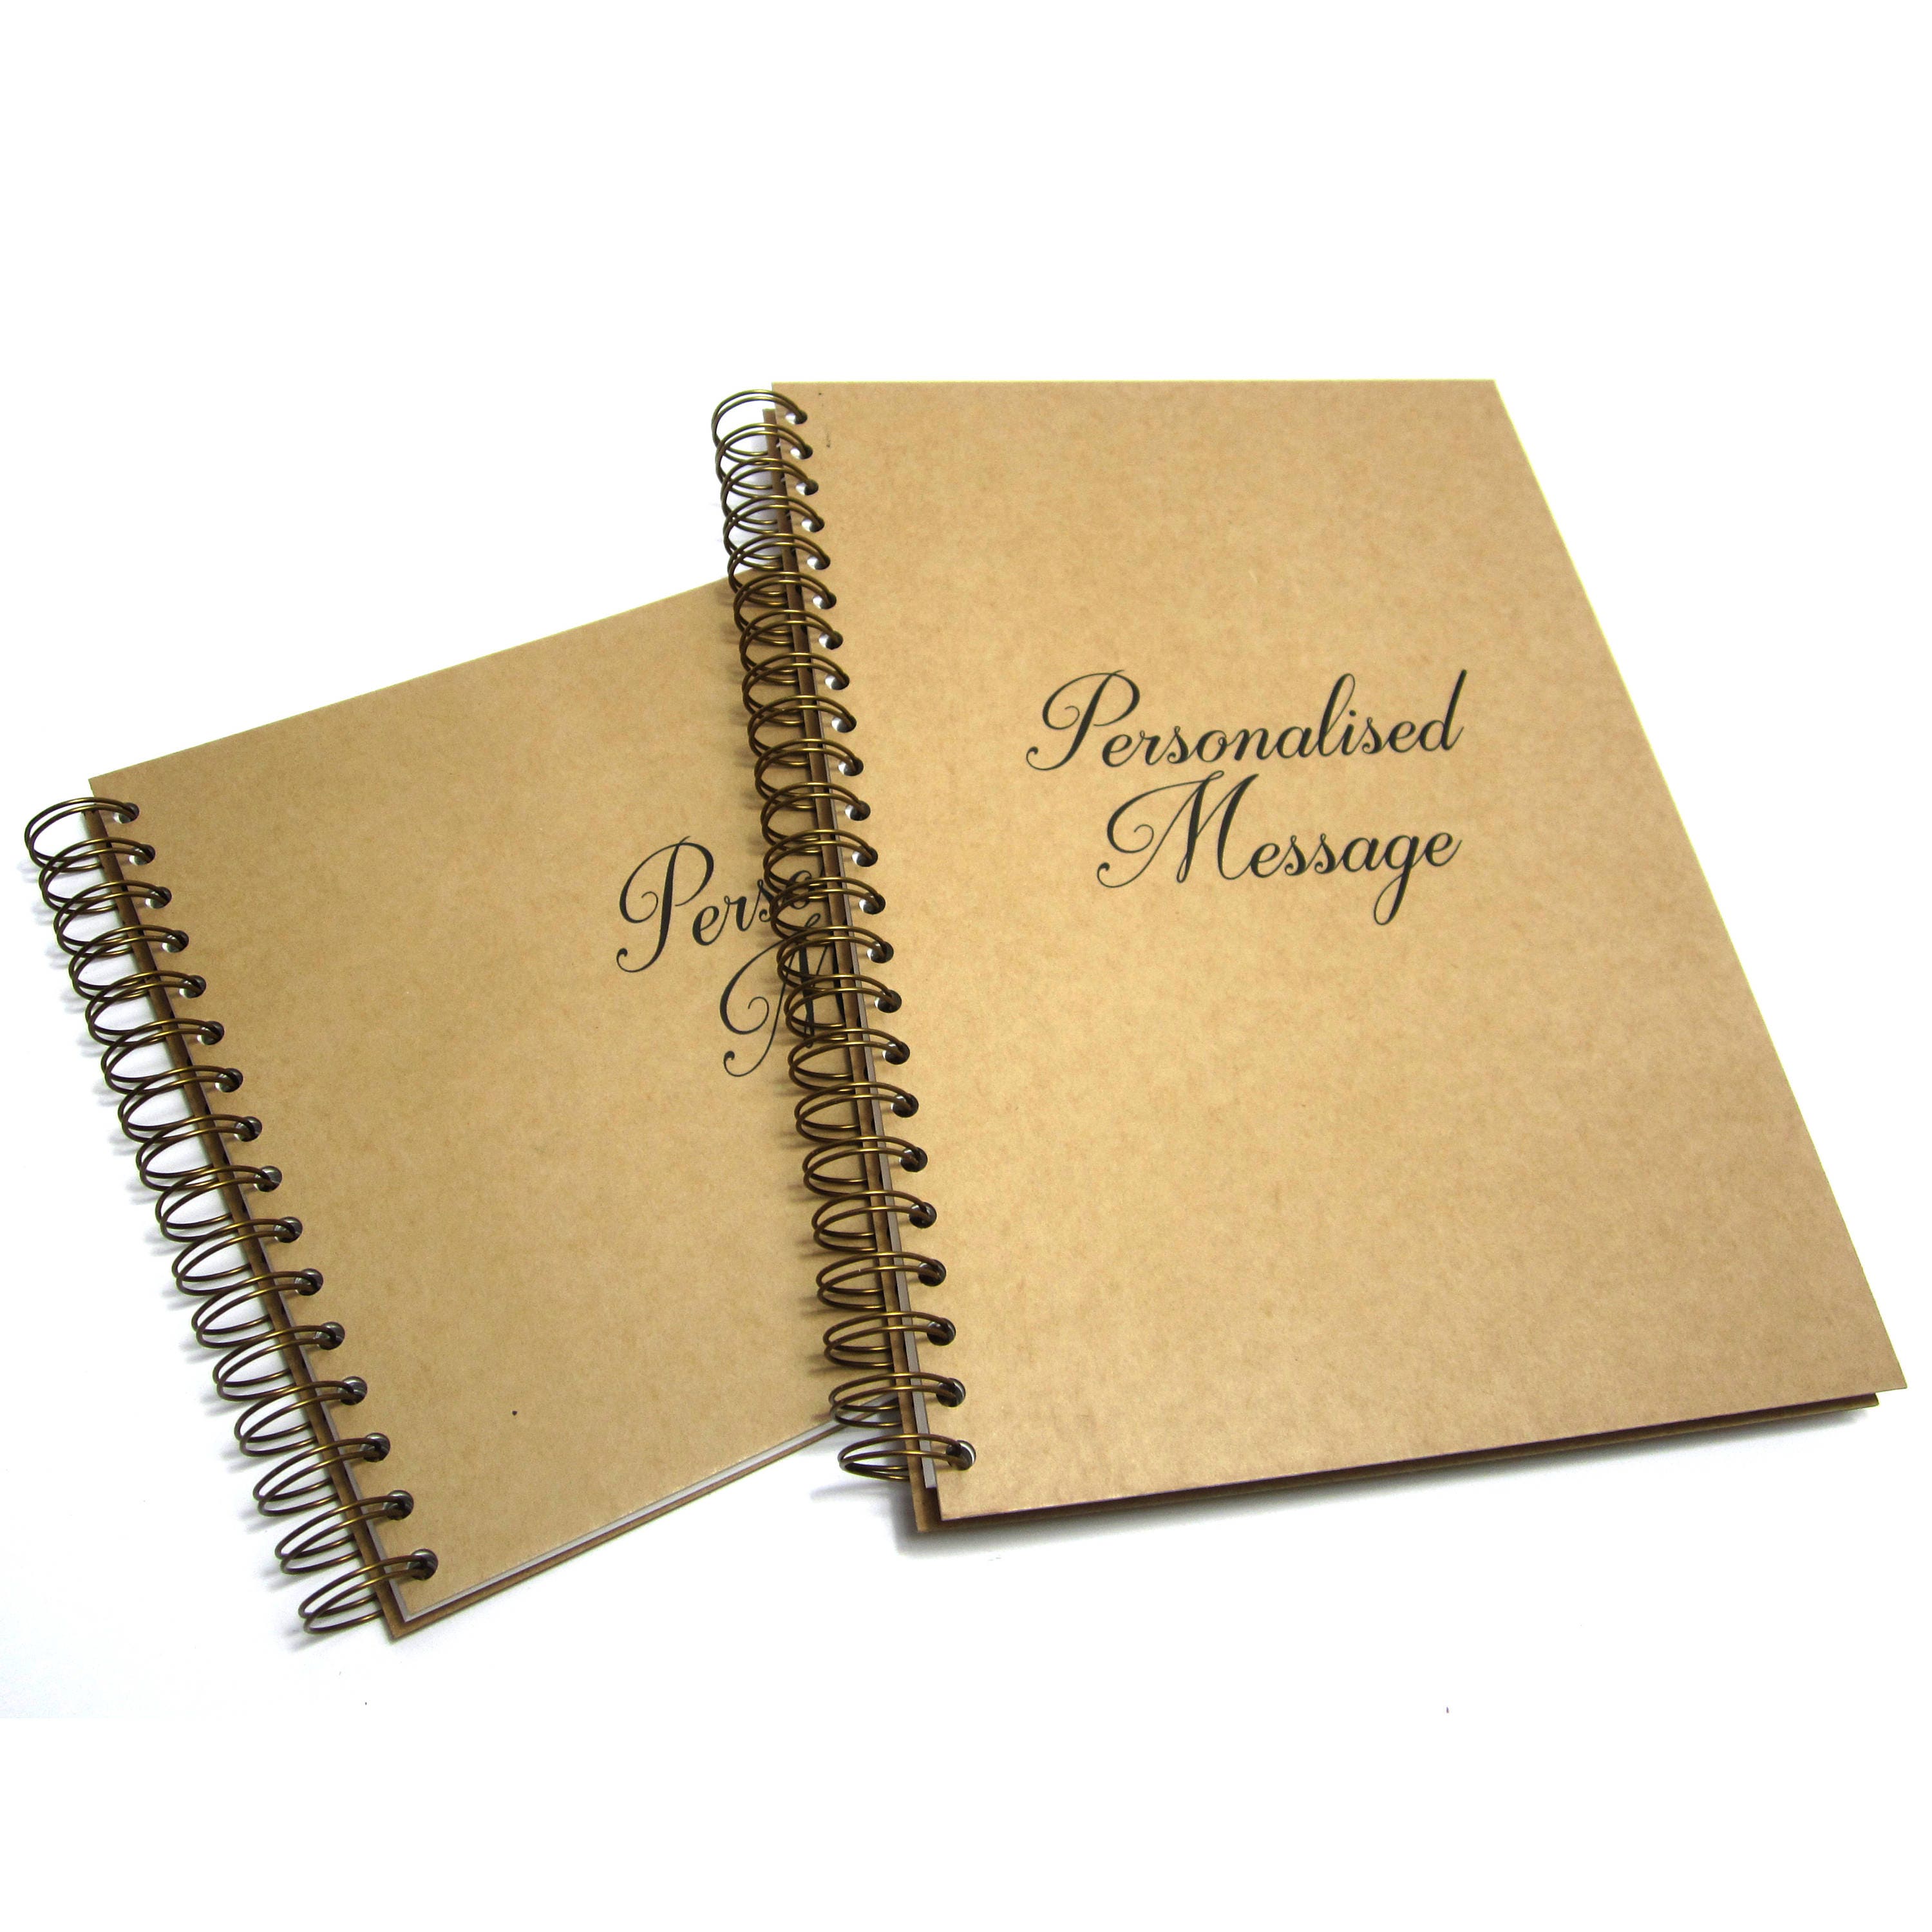 Personalised Notebook With Plain/blank Pages, A5 Black Sketchbook Journal  With Initials/monogram. Teacher Gift, Custom 